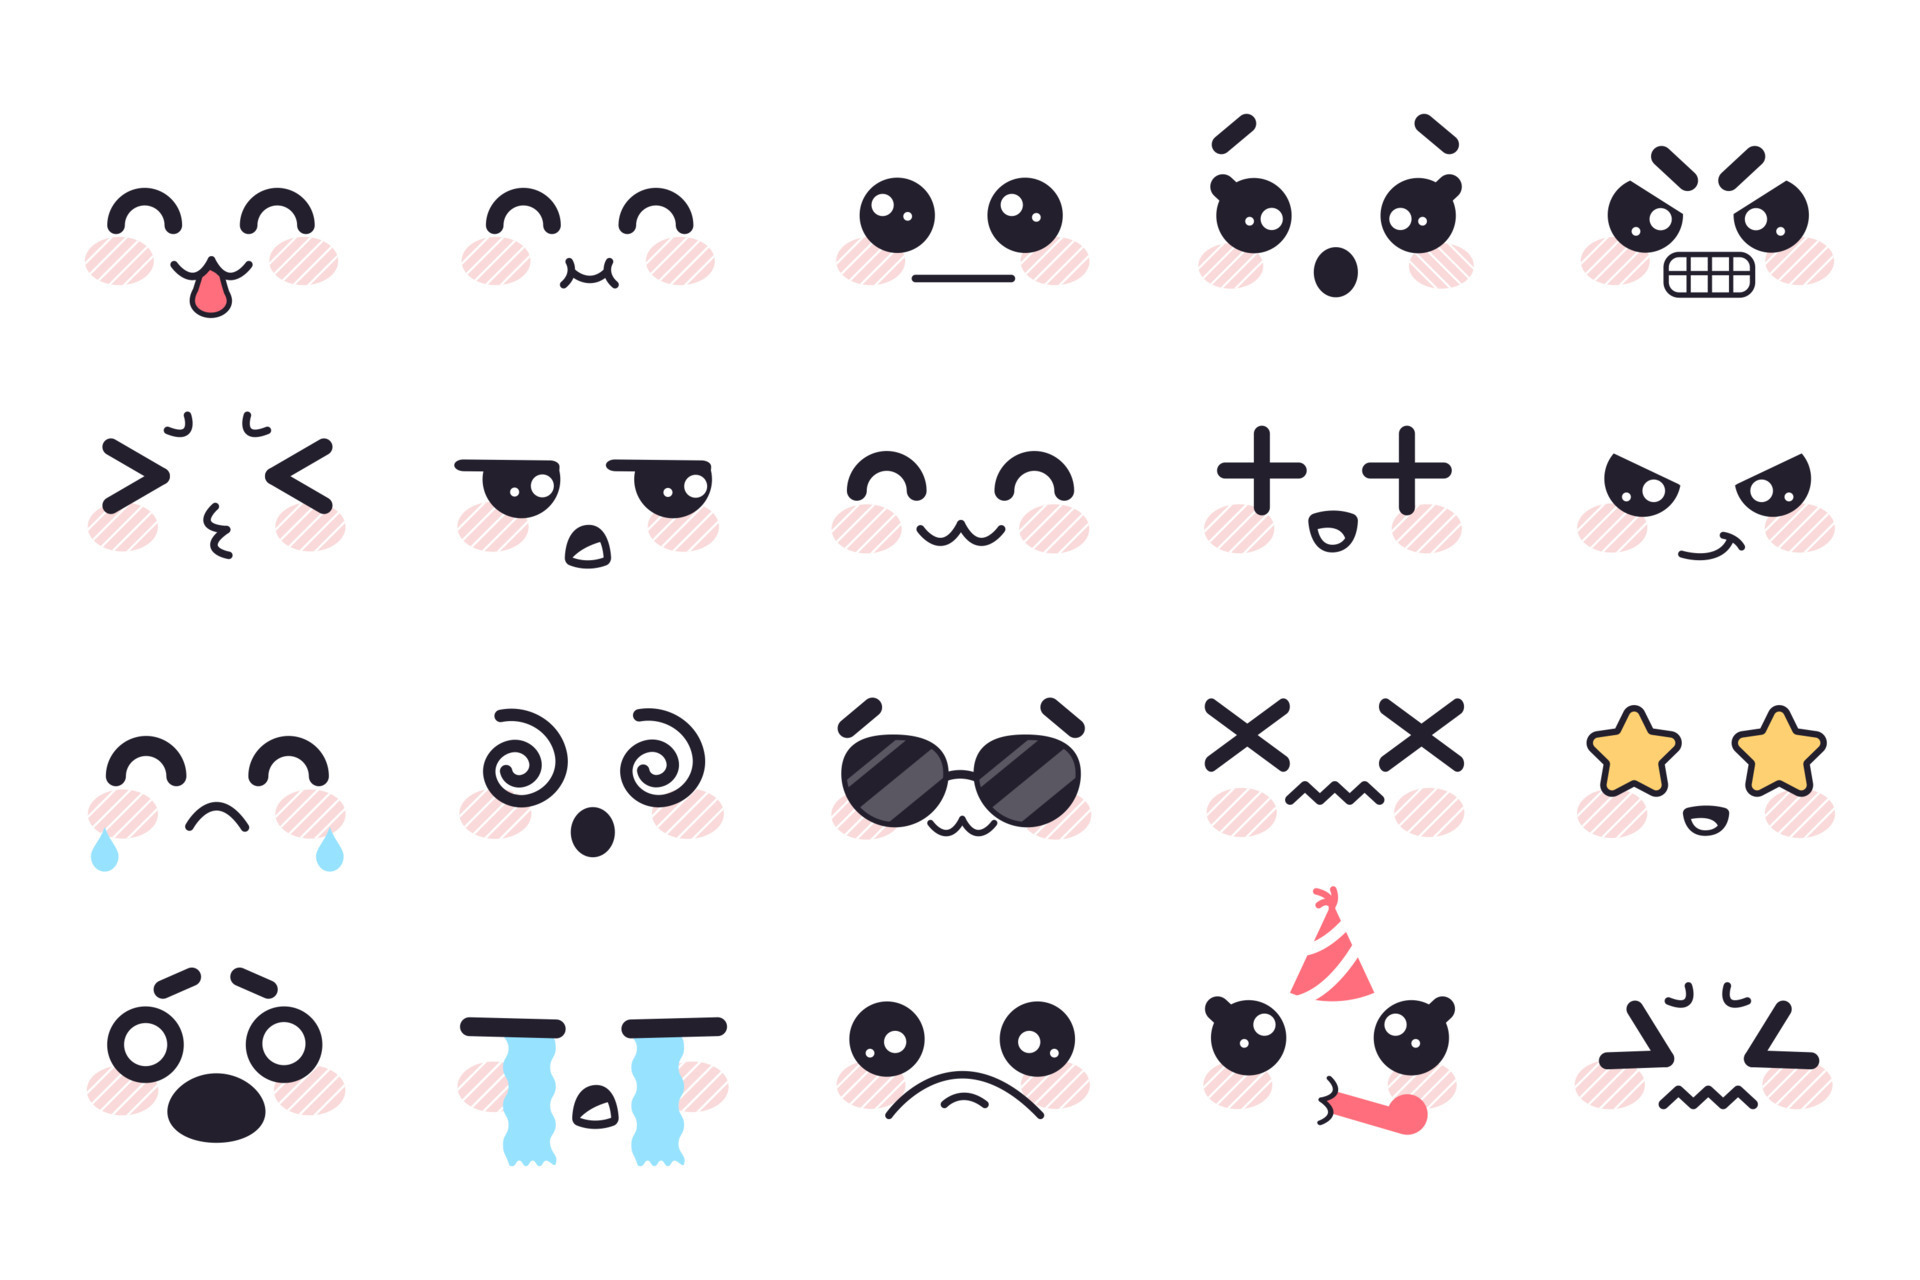 Premium Vector  Kawaii cute smile emoticons and japanese anime emoji faces  expressions vector cartoon style comic sketch icons set